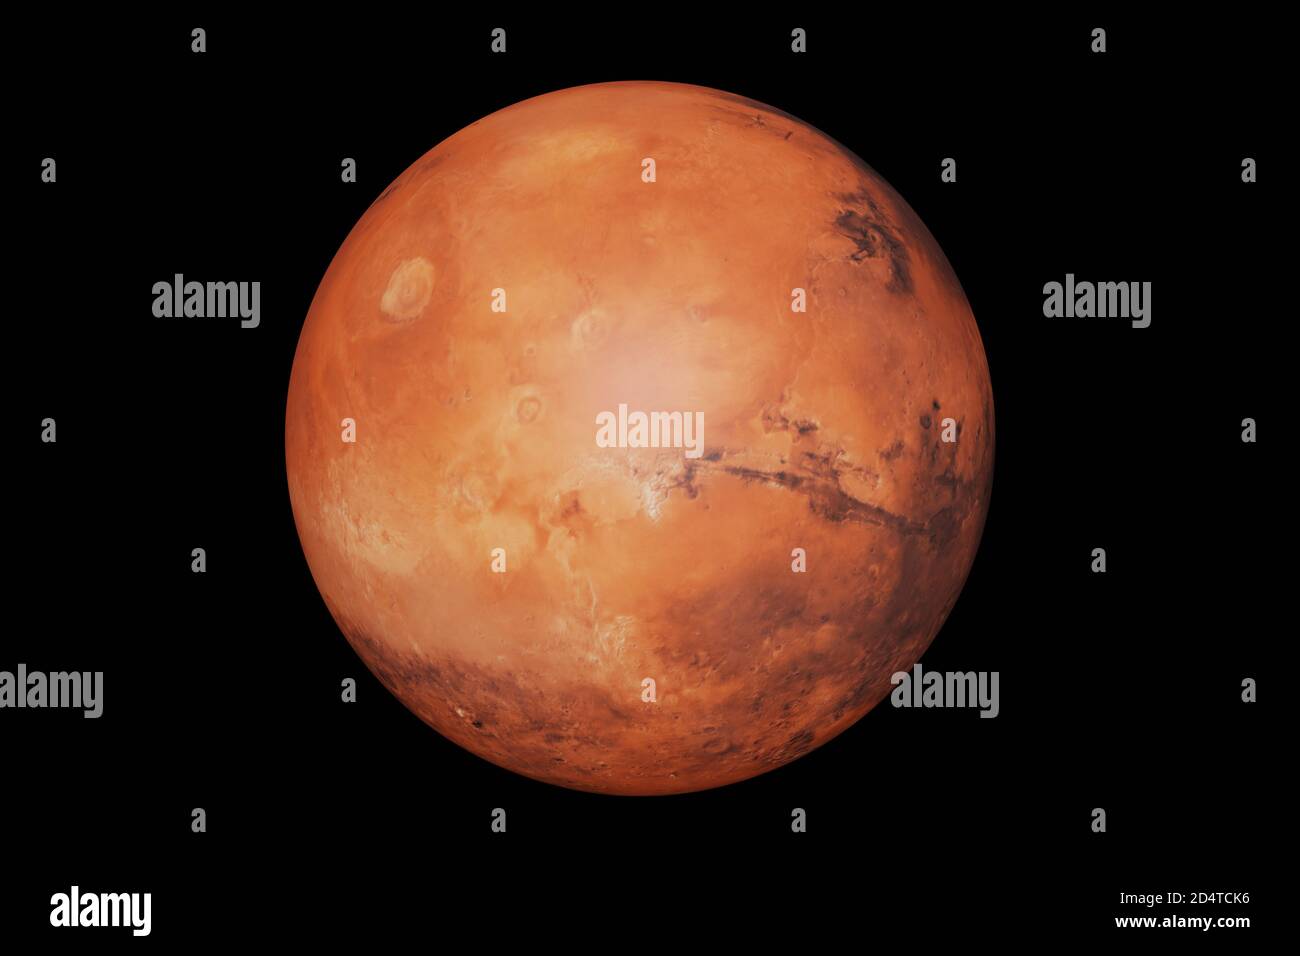 Highly detailed mars planet on black. Elements of this image furnished by NASA in 3D rendering Stock Photo